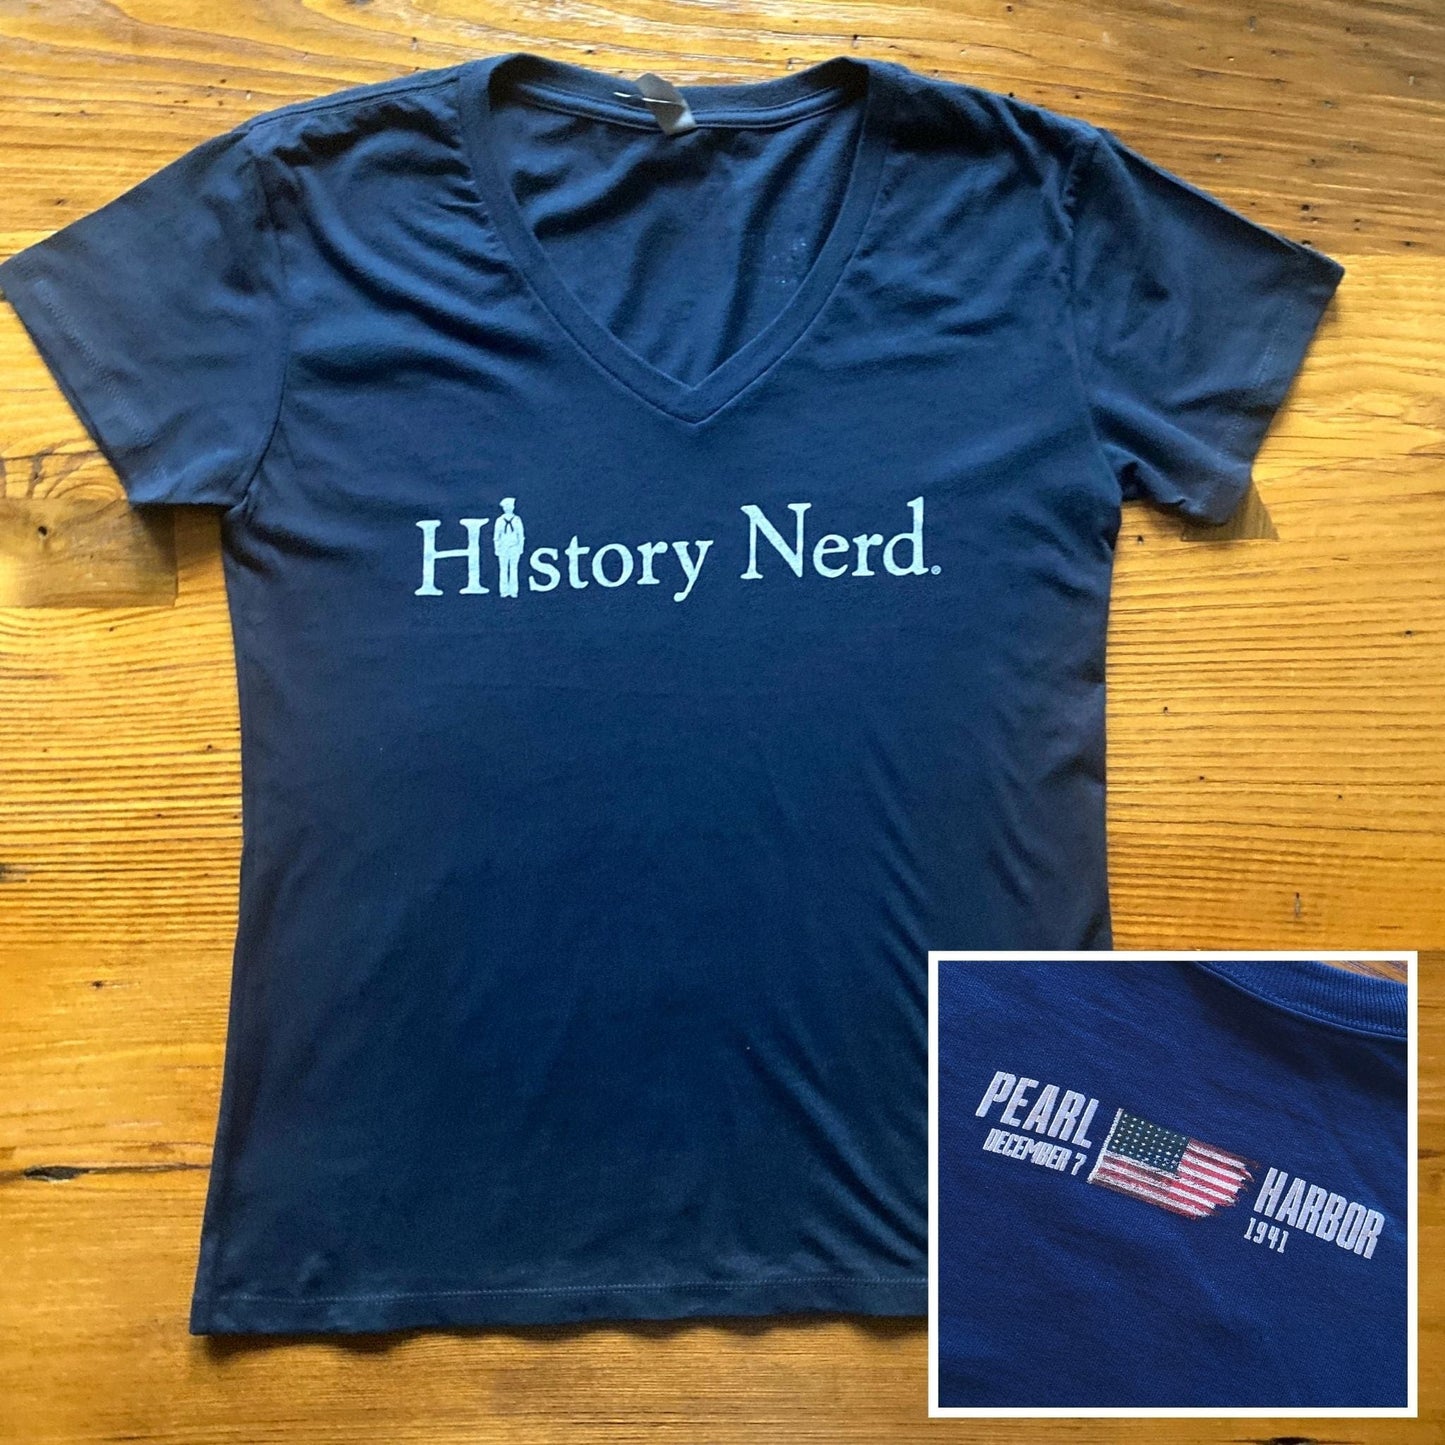 “History Nerd” Pearl Harbor V-neck shirt with WWII sailor and historic flag from the History List Store